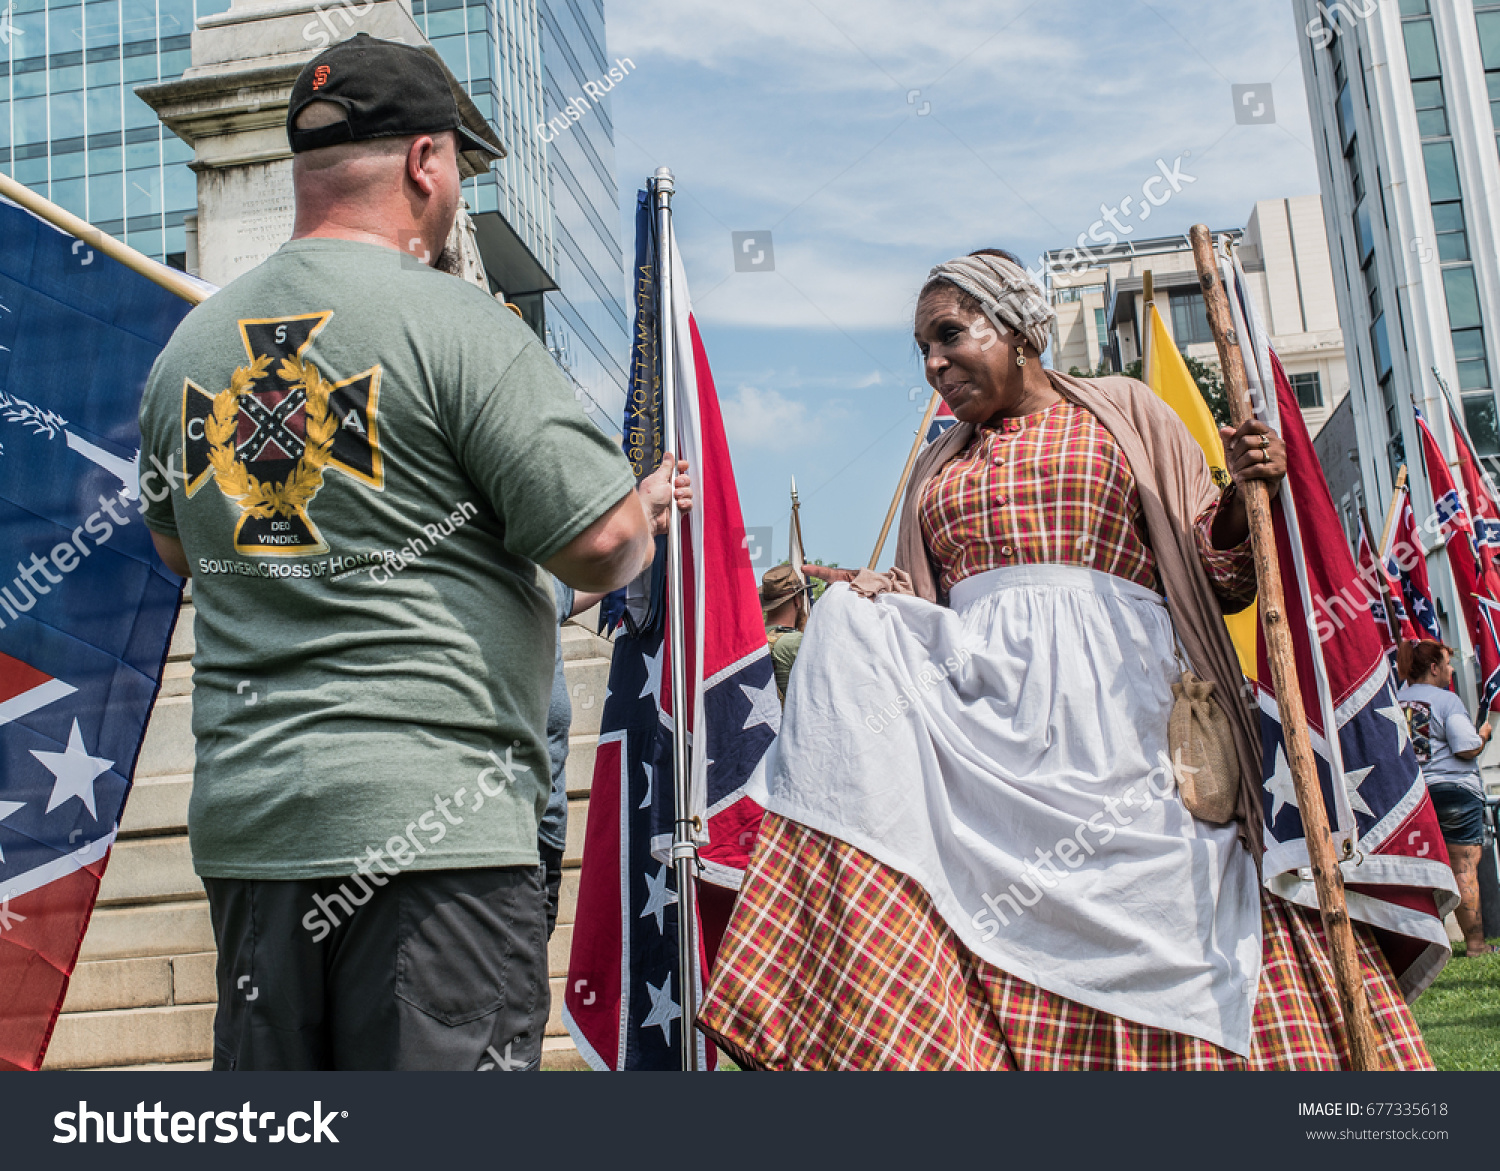 Columbia, South Carolina - July, 10, 2017: Confederate activist attend a flag raising event held in protest of the the Confederate flag's removal from the S.C. State House in 2015 #677335618